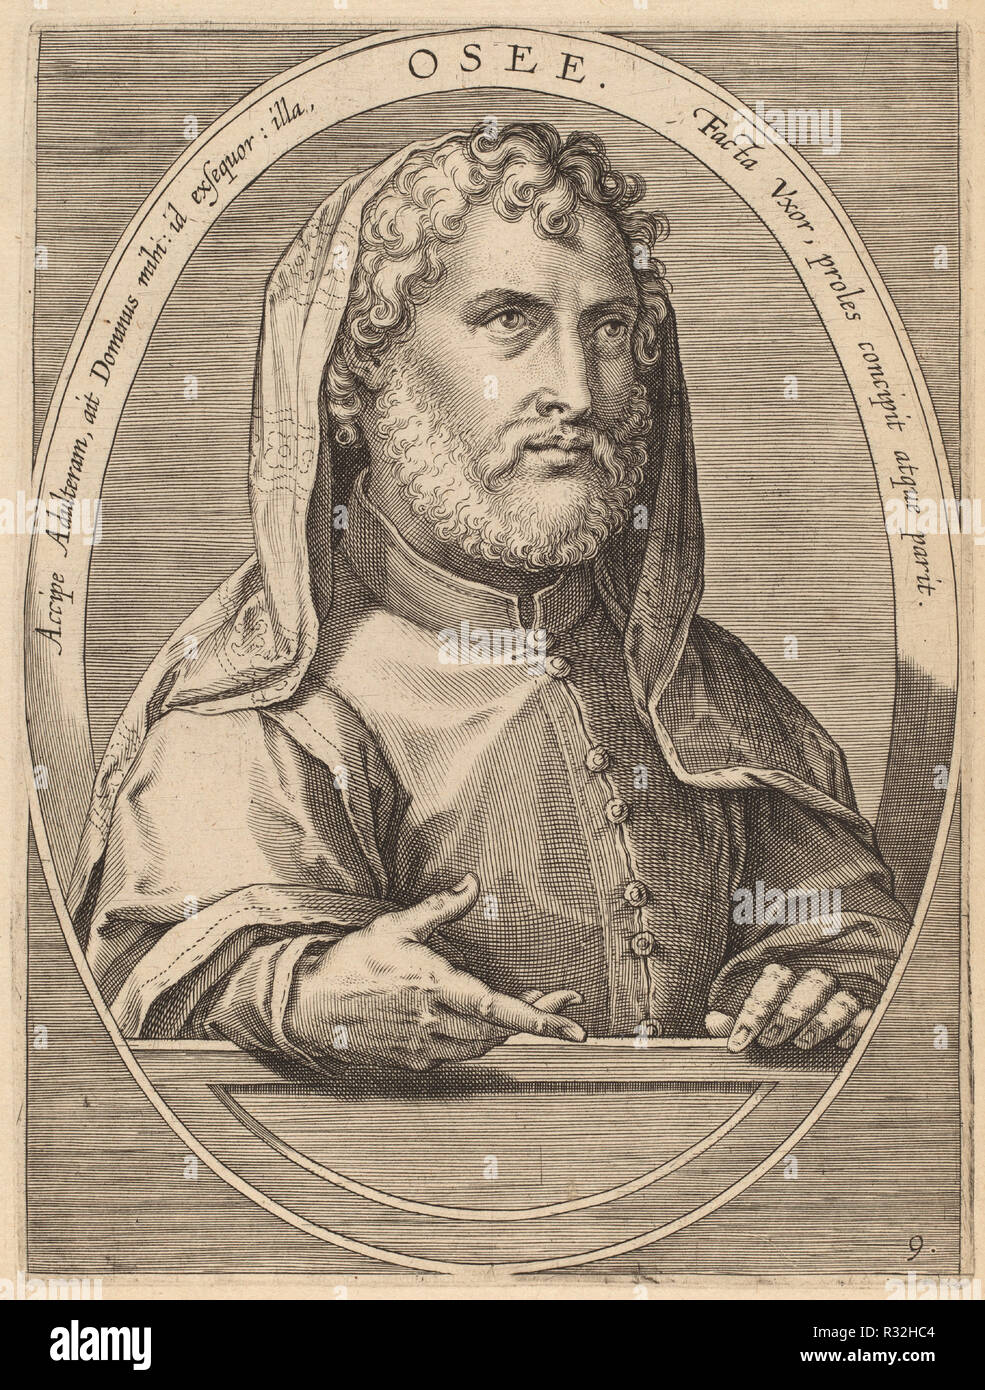 Hosiah. Dated: published 1613. Dimensions: plate: 17.8 x 13.4 cm (7 x 5 1/4 in.)  sheet: 24.3 x 19.1 cm (9 9/16 x 7 1/2 in.). Medium: engraving on laid paper. Museum: National Gallery of Art, Washington DC. Author: Theodor Galle after Jan van der Straet. Stock Photo